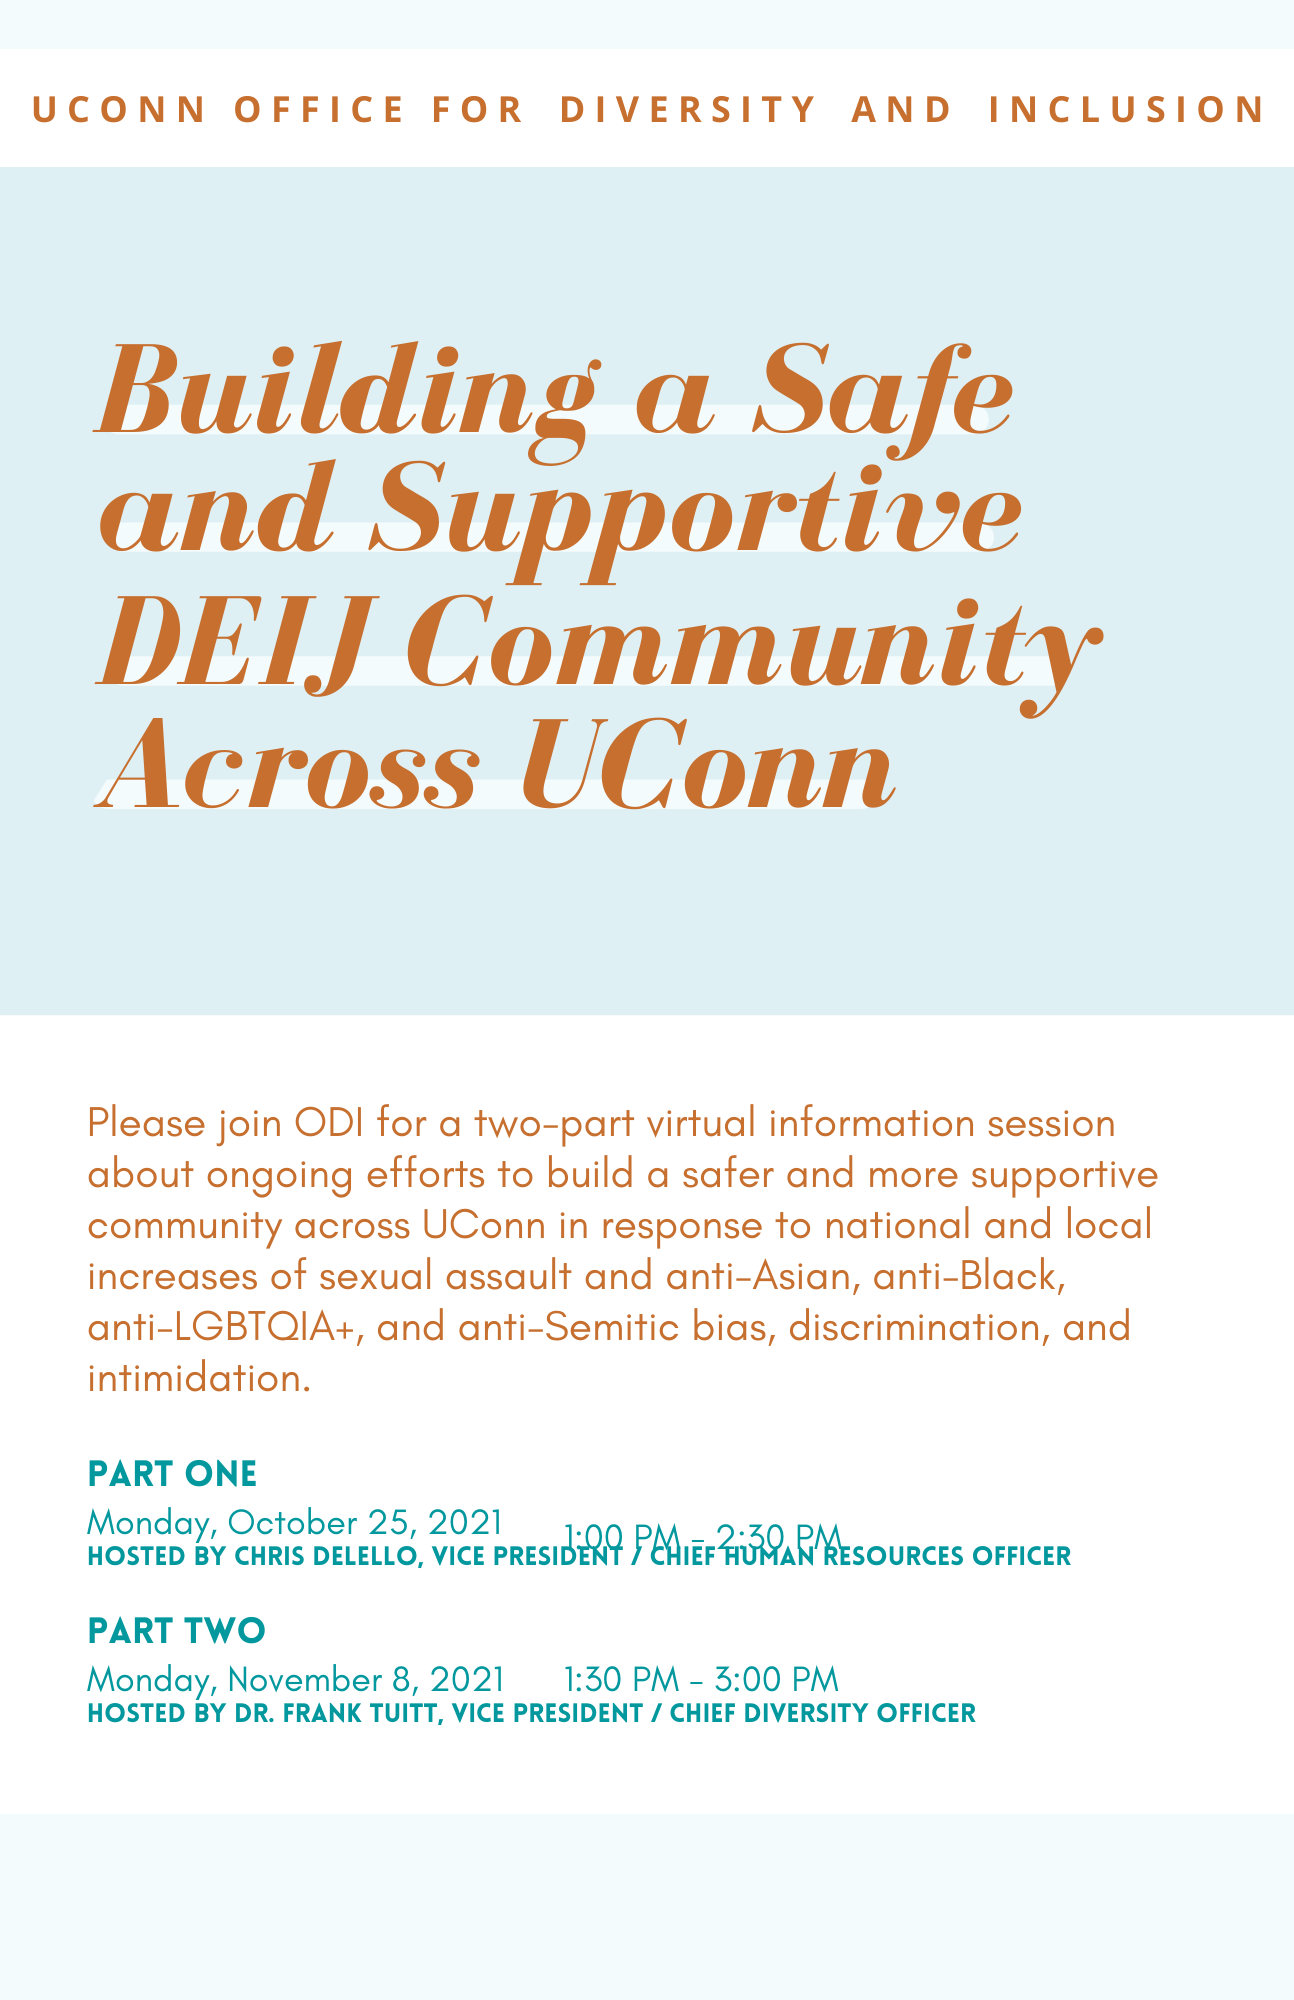 Building a Safe and Supportive DEIJ Community Across UConn